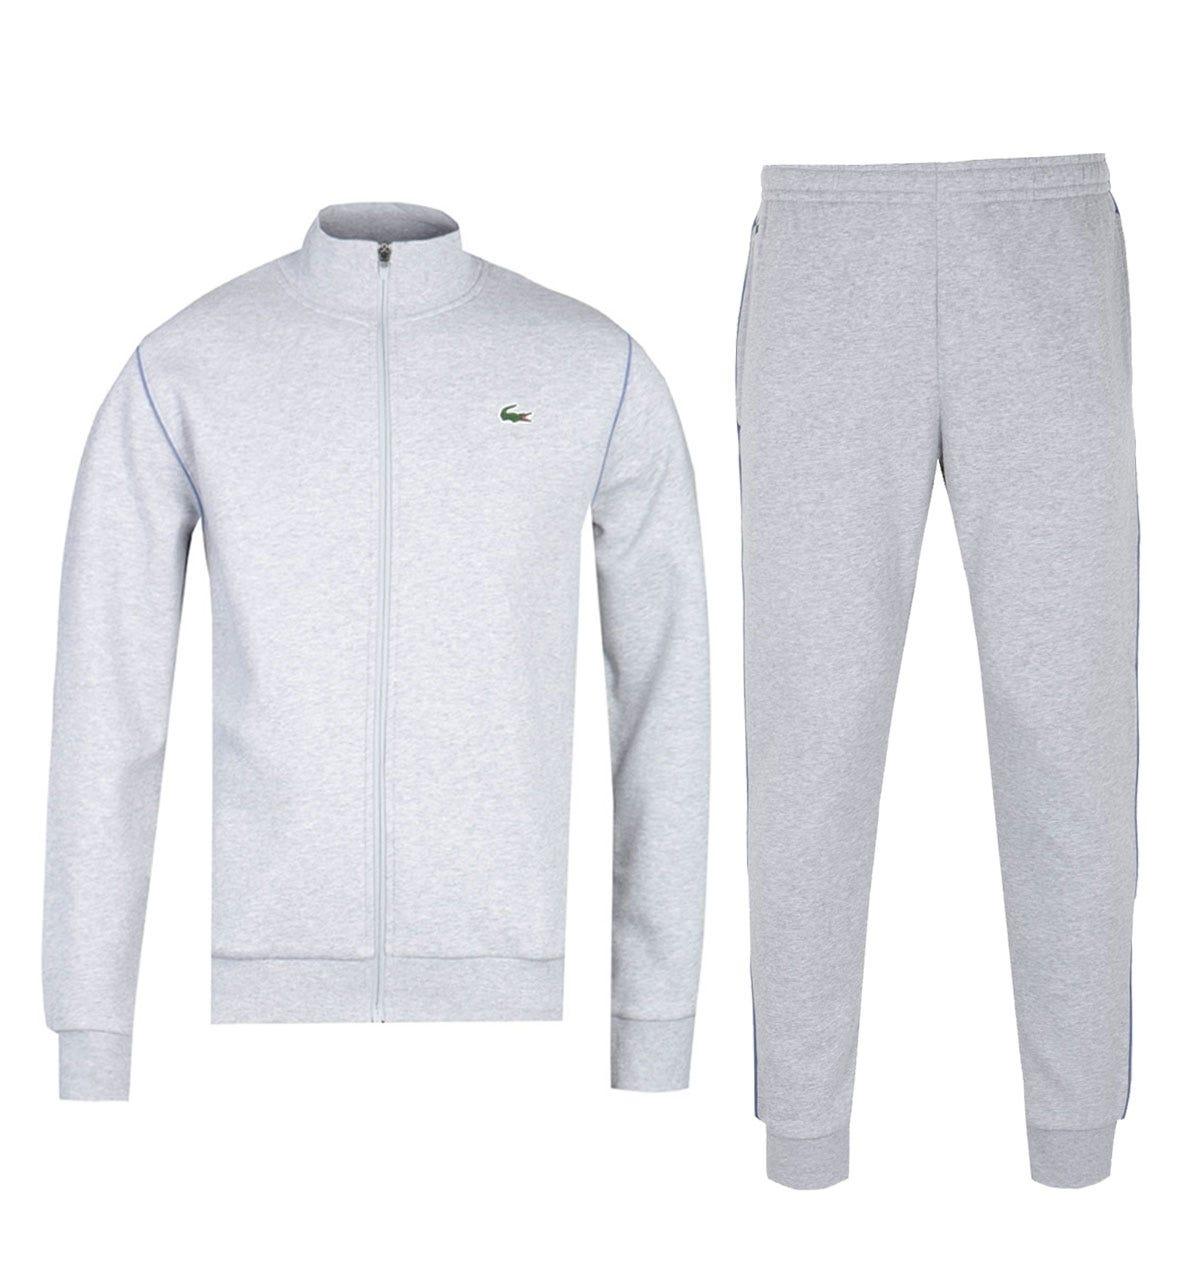 Lacoste Cotton Funnel Neck Grey Marl Tracksuit in Gray for Men - Lyst